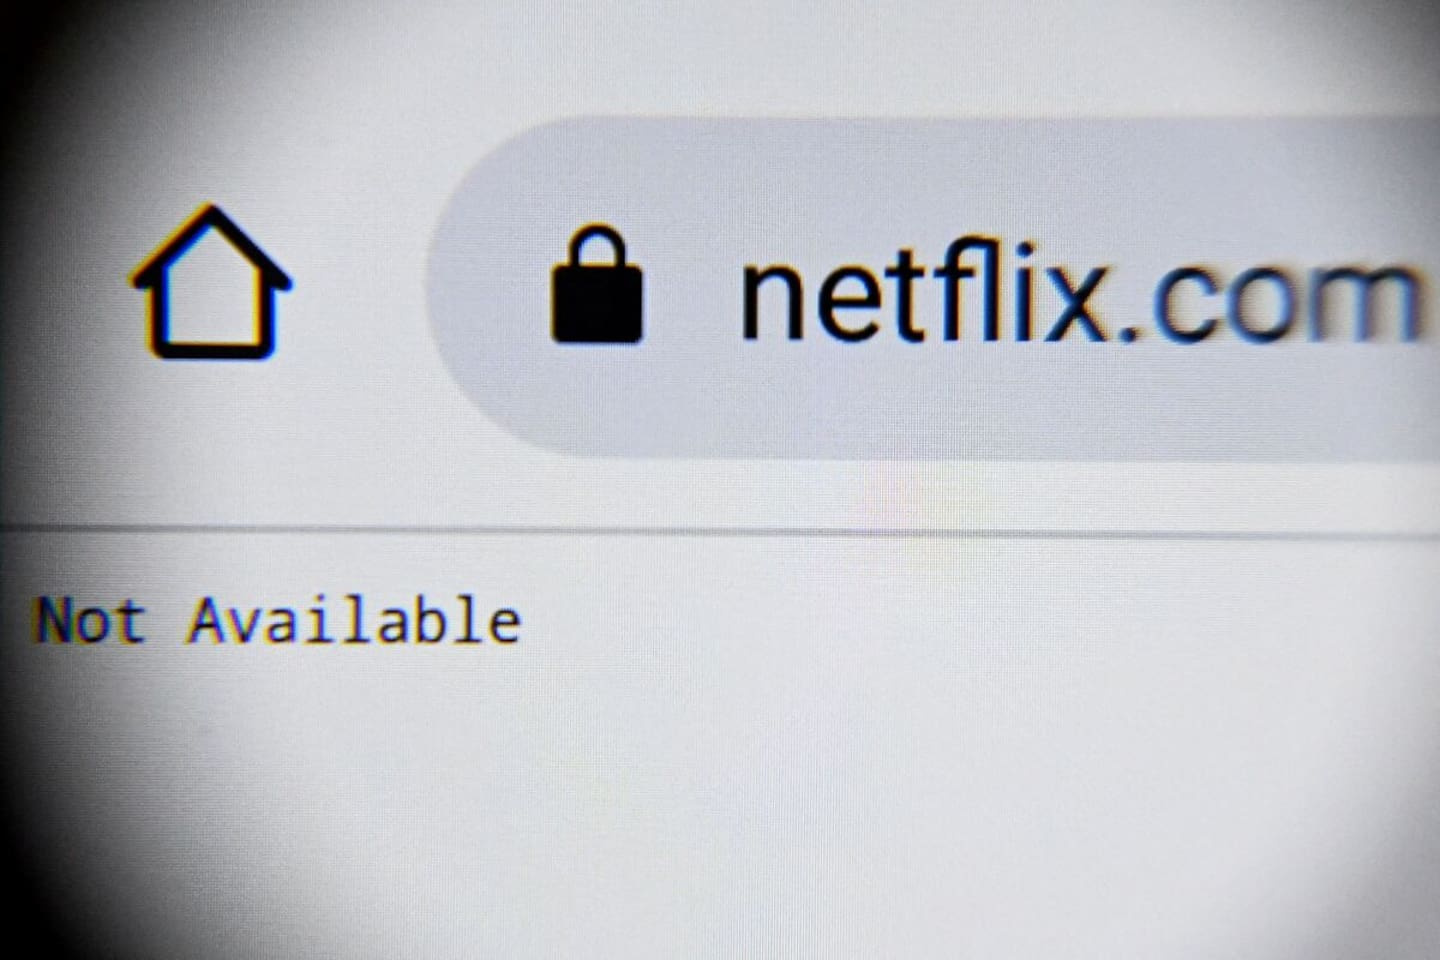 Russians now deprived of Netflix